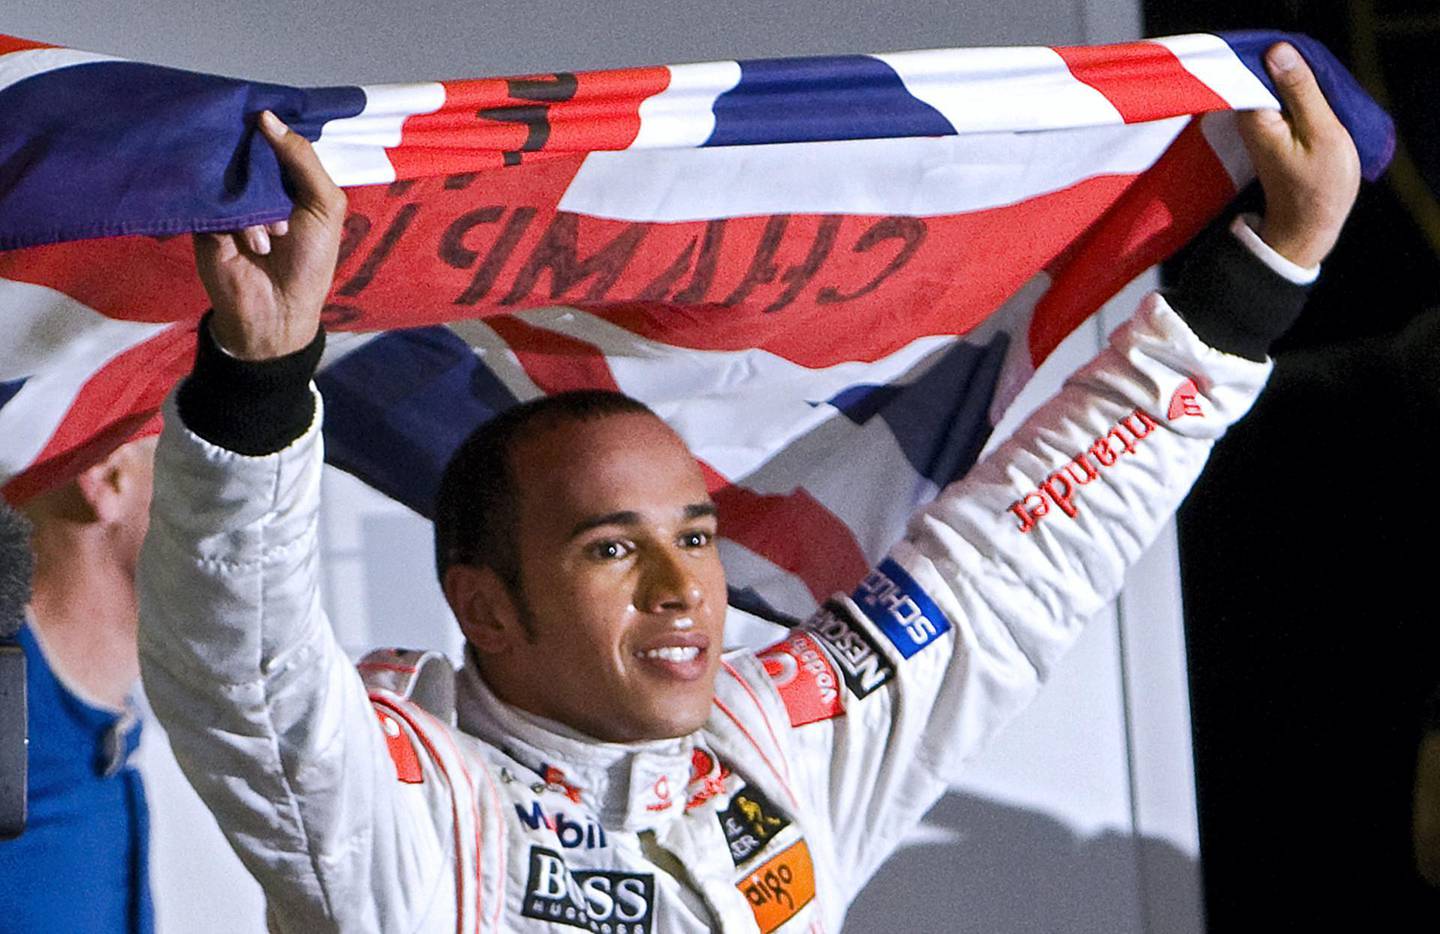 British Formula One driver Lewis Hamilton waves his national flag to celebrate after winning the F-1 World Championship on November 2, 2008, at Interlagos race track in Sao Paulo, Brazil. Hamilton was crowned Formula One champion after finishing fifth in the Brazil Grand Prix.   AFP PHOTO / ANTONIO SCORZA (Photo by ANTONIO SCORZA / AFP)